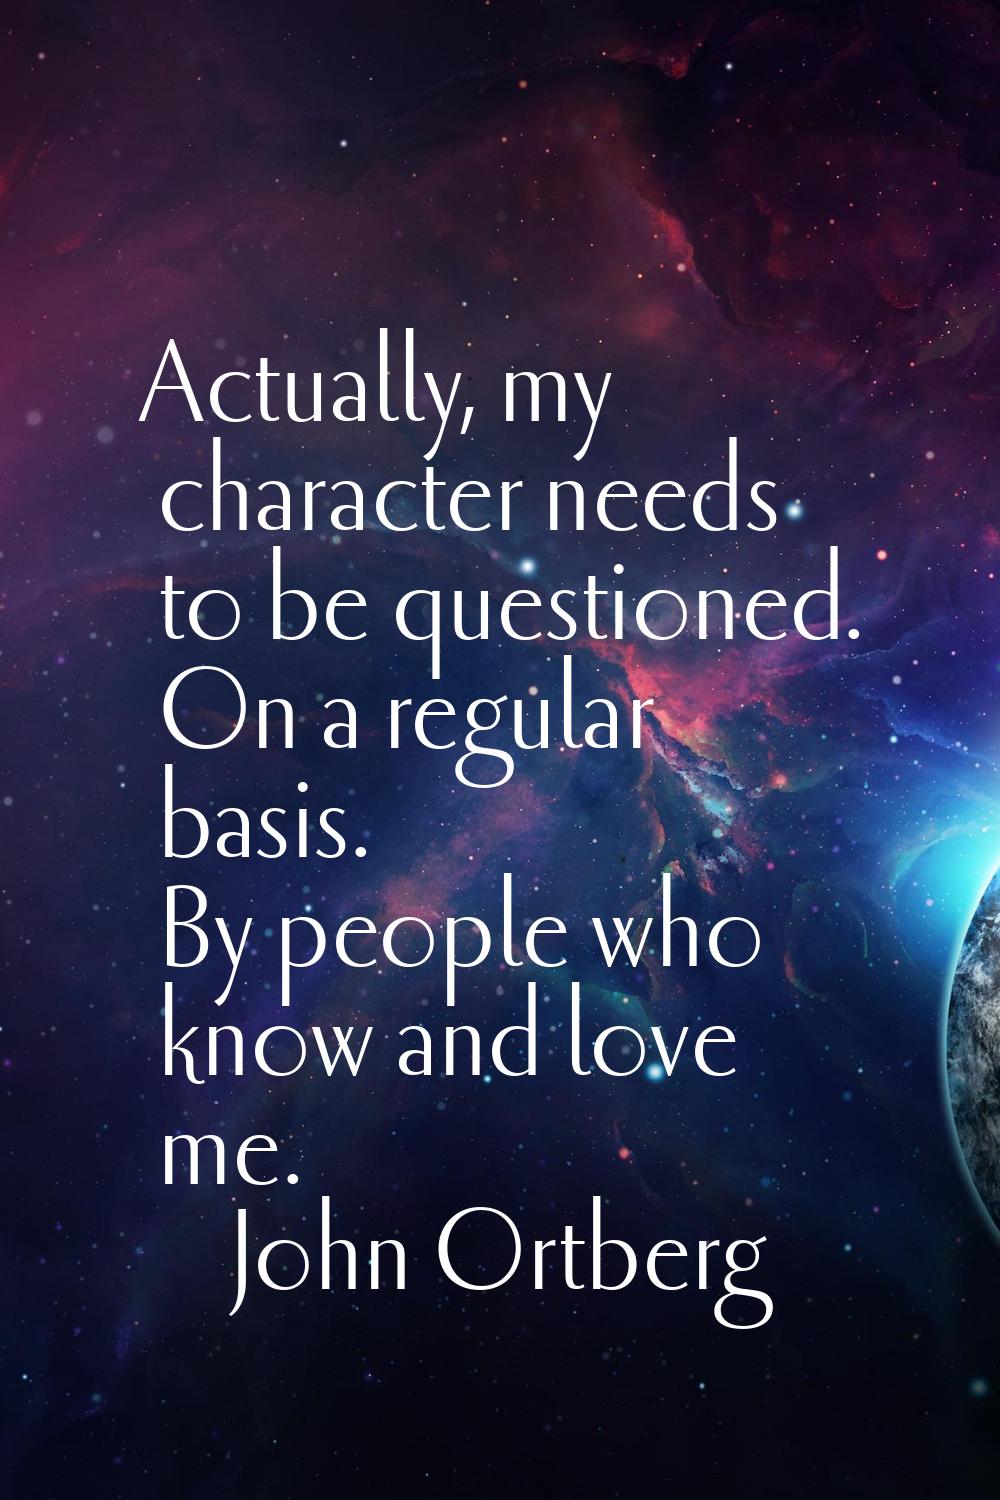 Actually, my character needs to be questioned. On a regular basis. By people who know and love me.